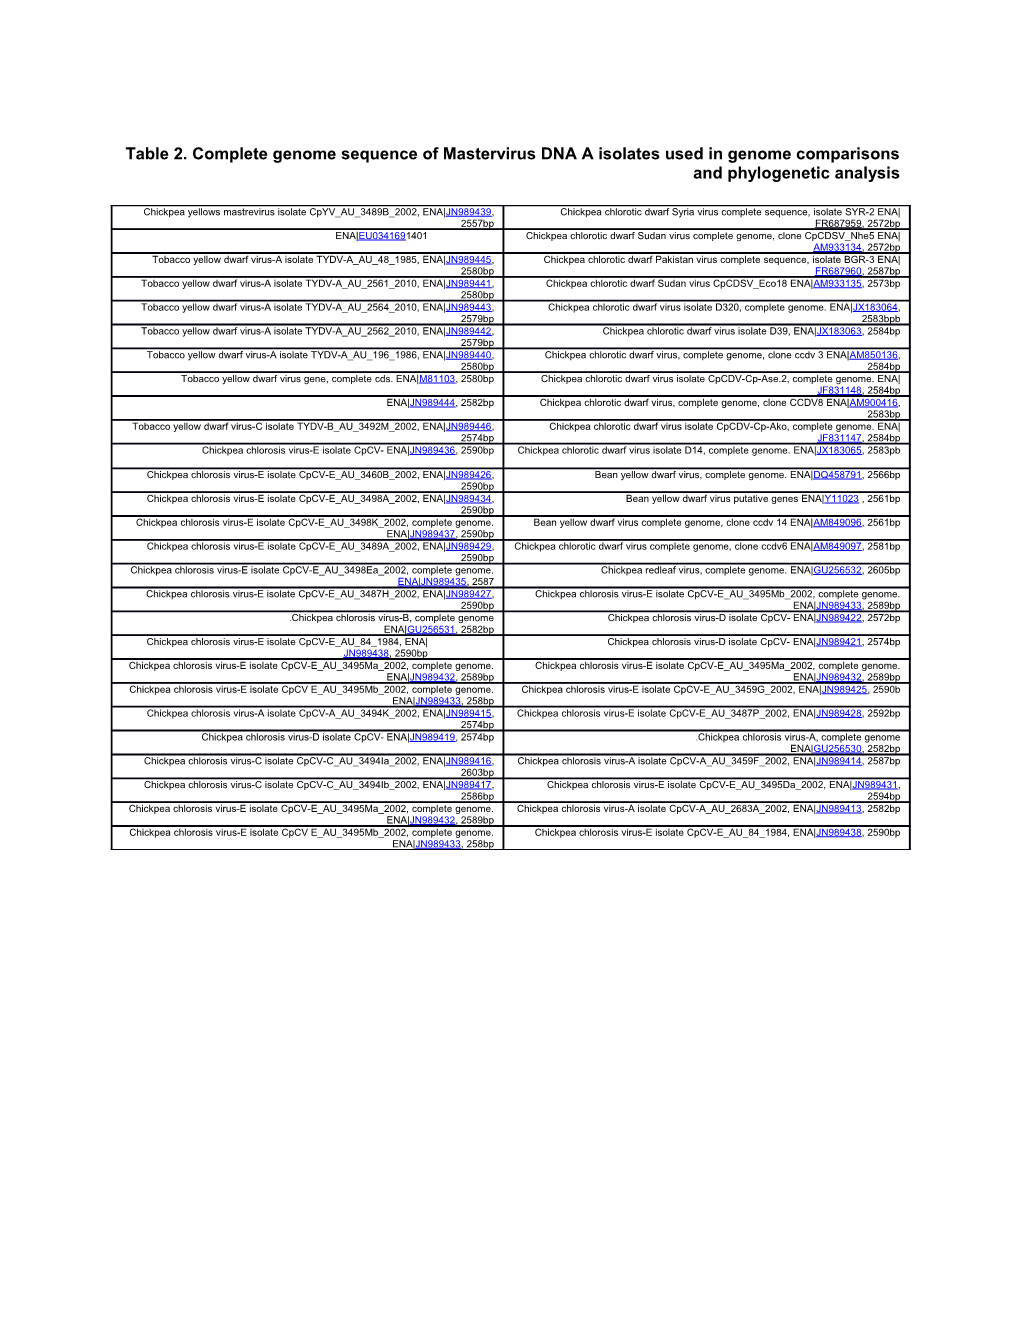 Table 2.Complete Genome Sequence of Mastervirus DNA a Isolates Used in Genome Comparisons